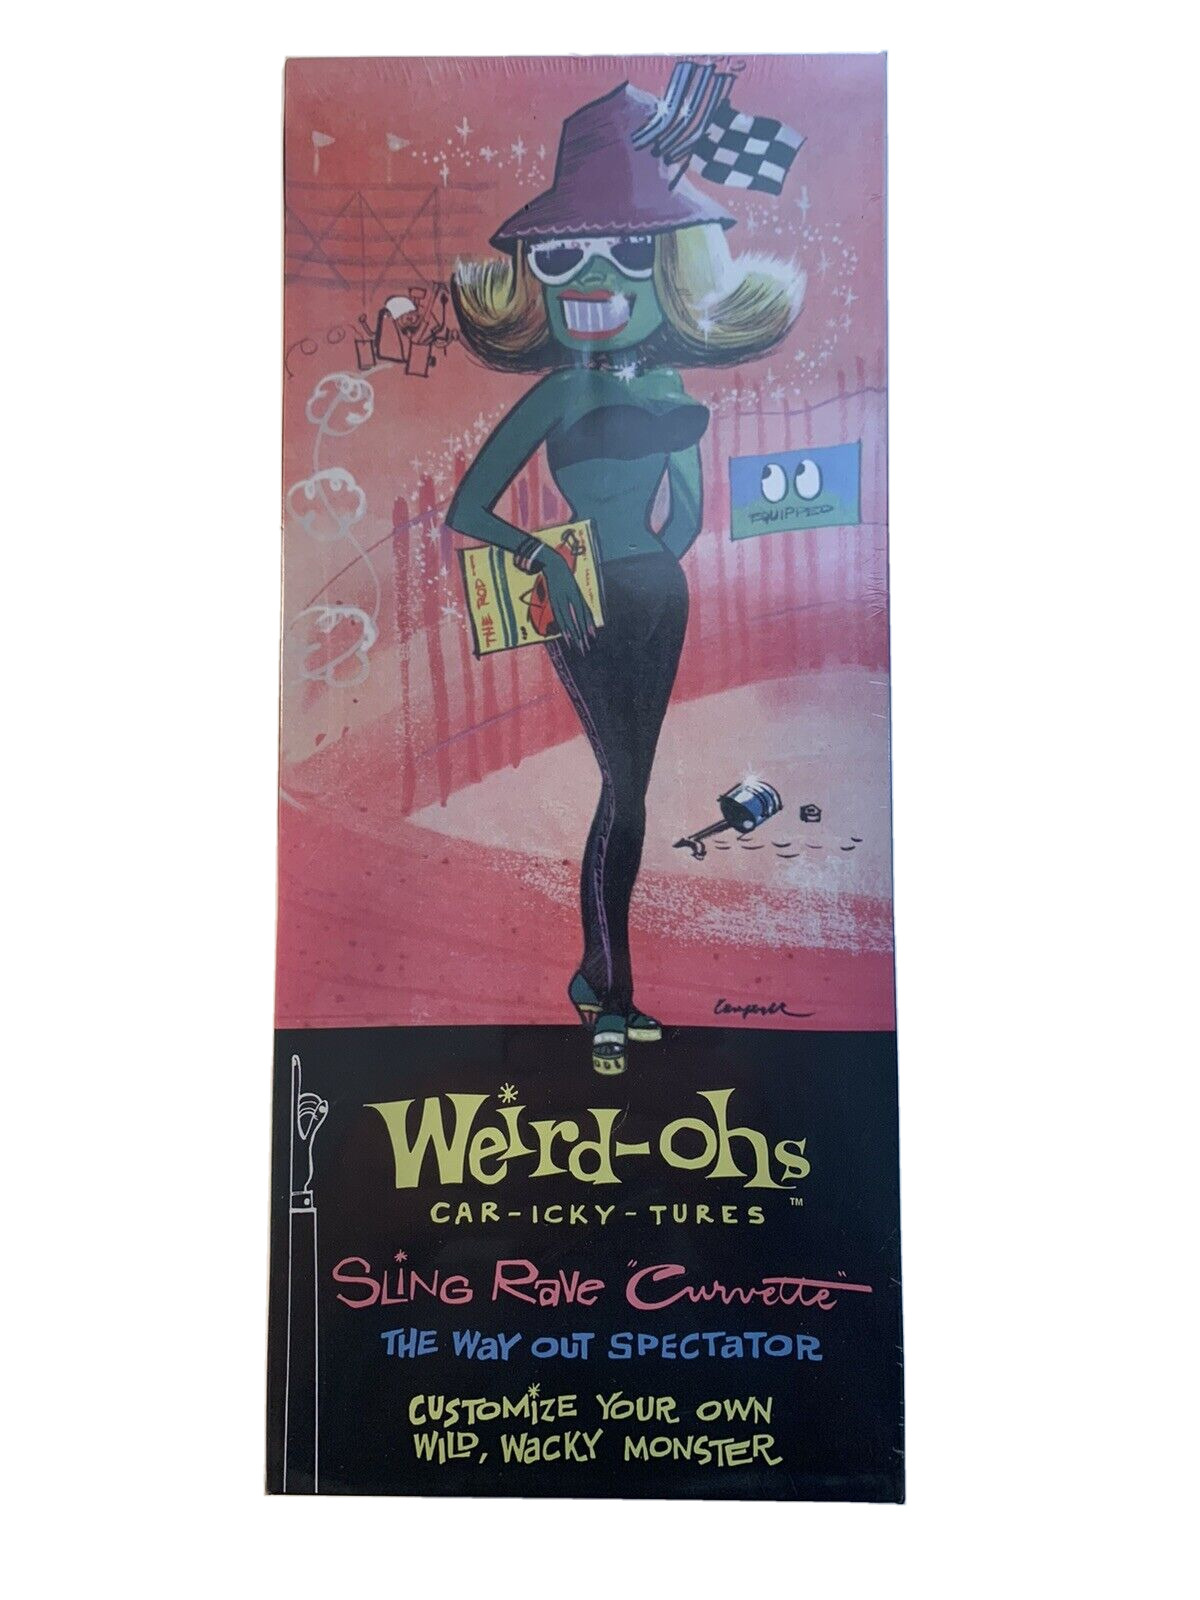 Hawk Model Company Weird-ohs Sling Rave Curvette The Way Out Spectator Model Kit